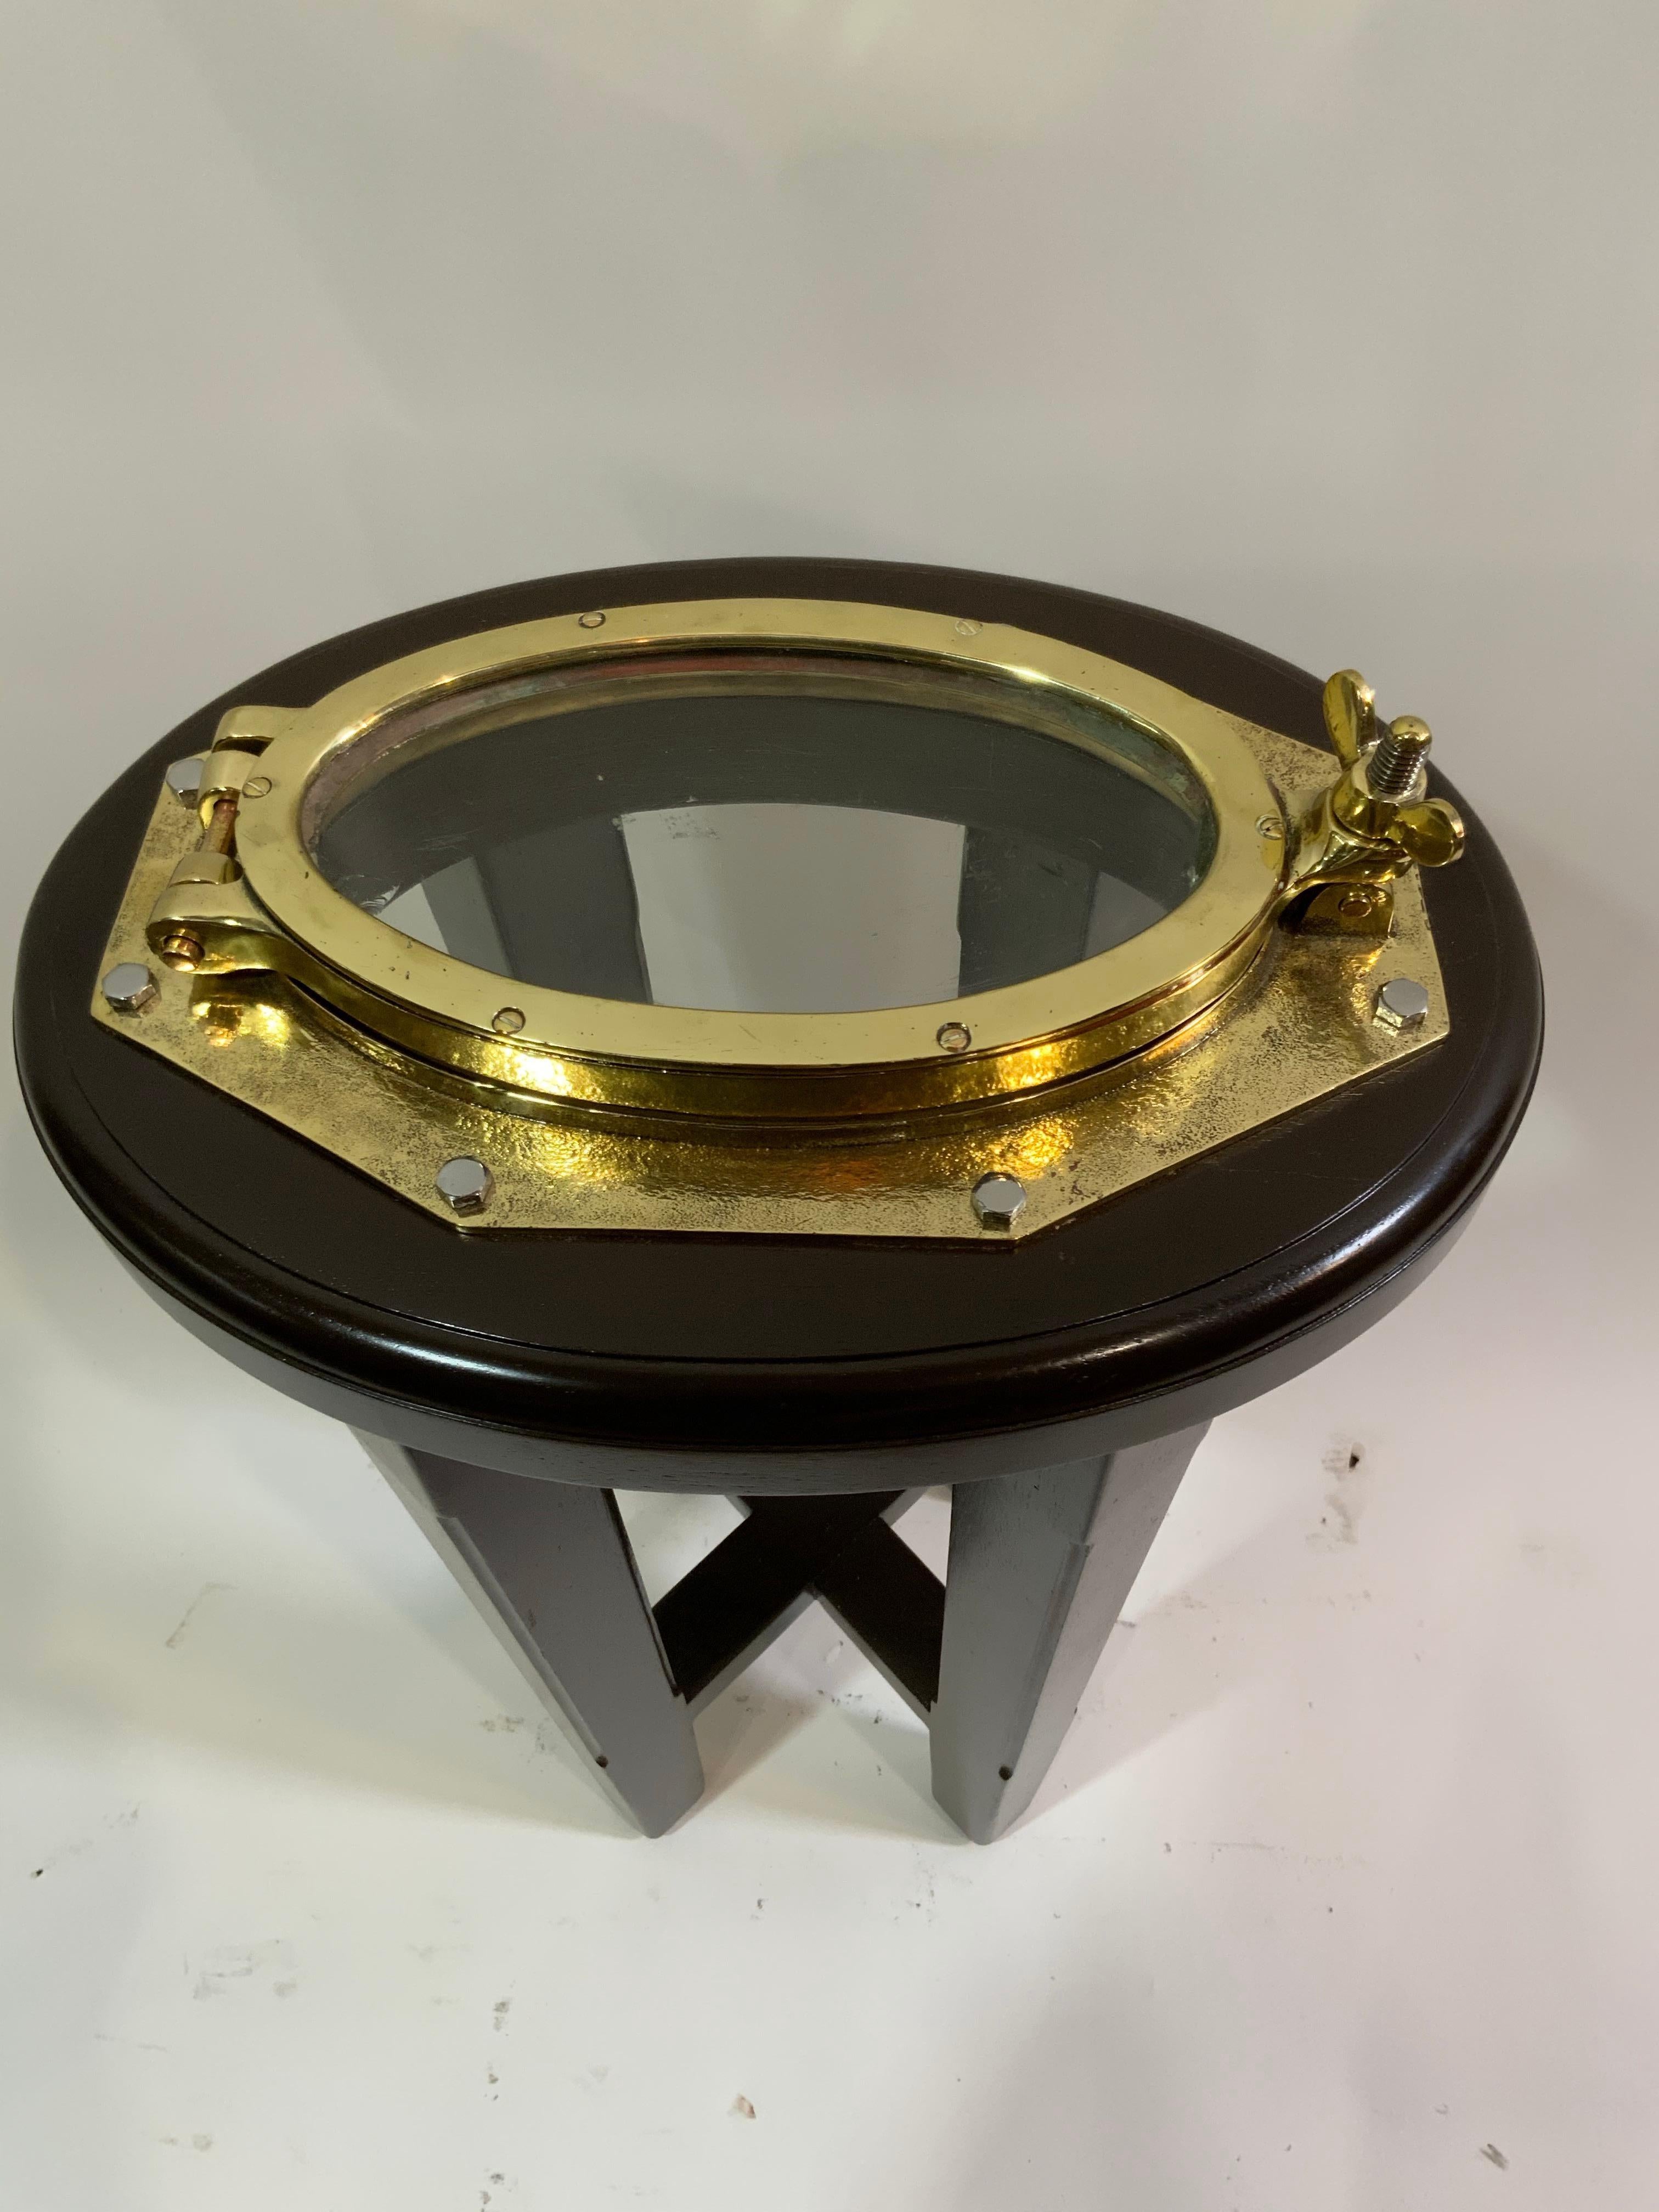 Solid brass boat porthole that has been meticulously polished and lacquered, then mounted to a custom mahogany table stand. Oval glass. Weight is 17 pounds. Height is 24 inches and width 15 by 11.